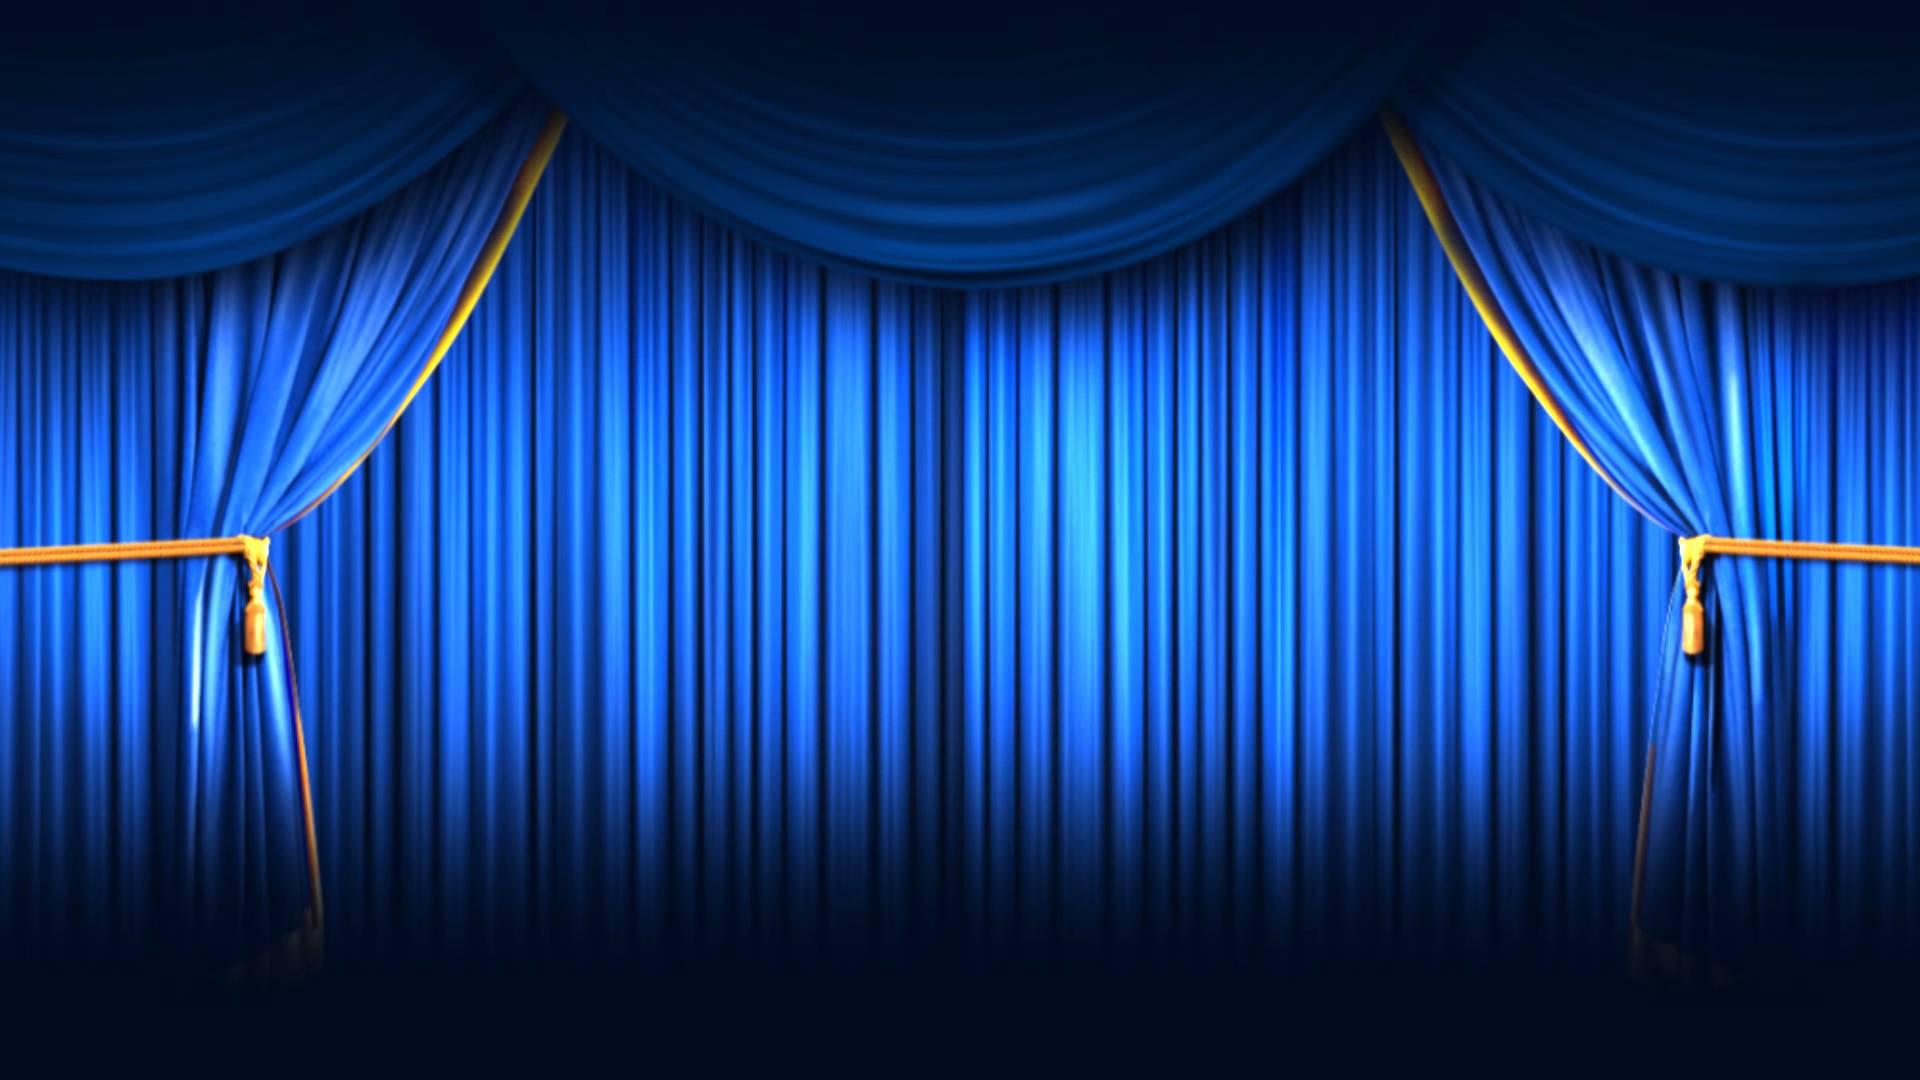 The Stage Curtain Psd Layered Templates Design Elemen - vrogue.co